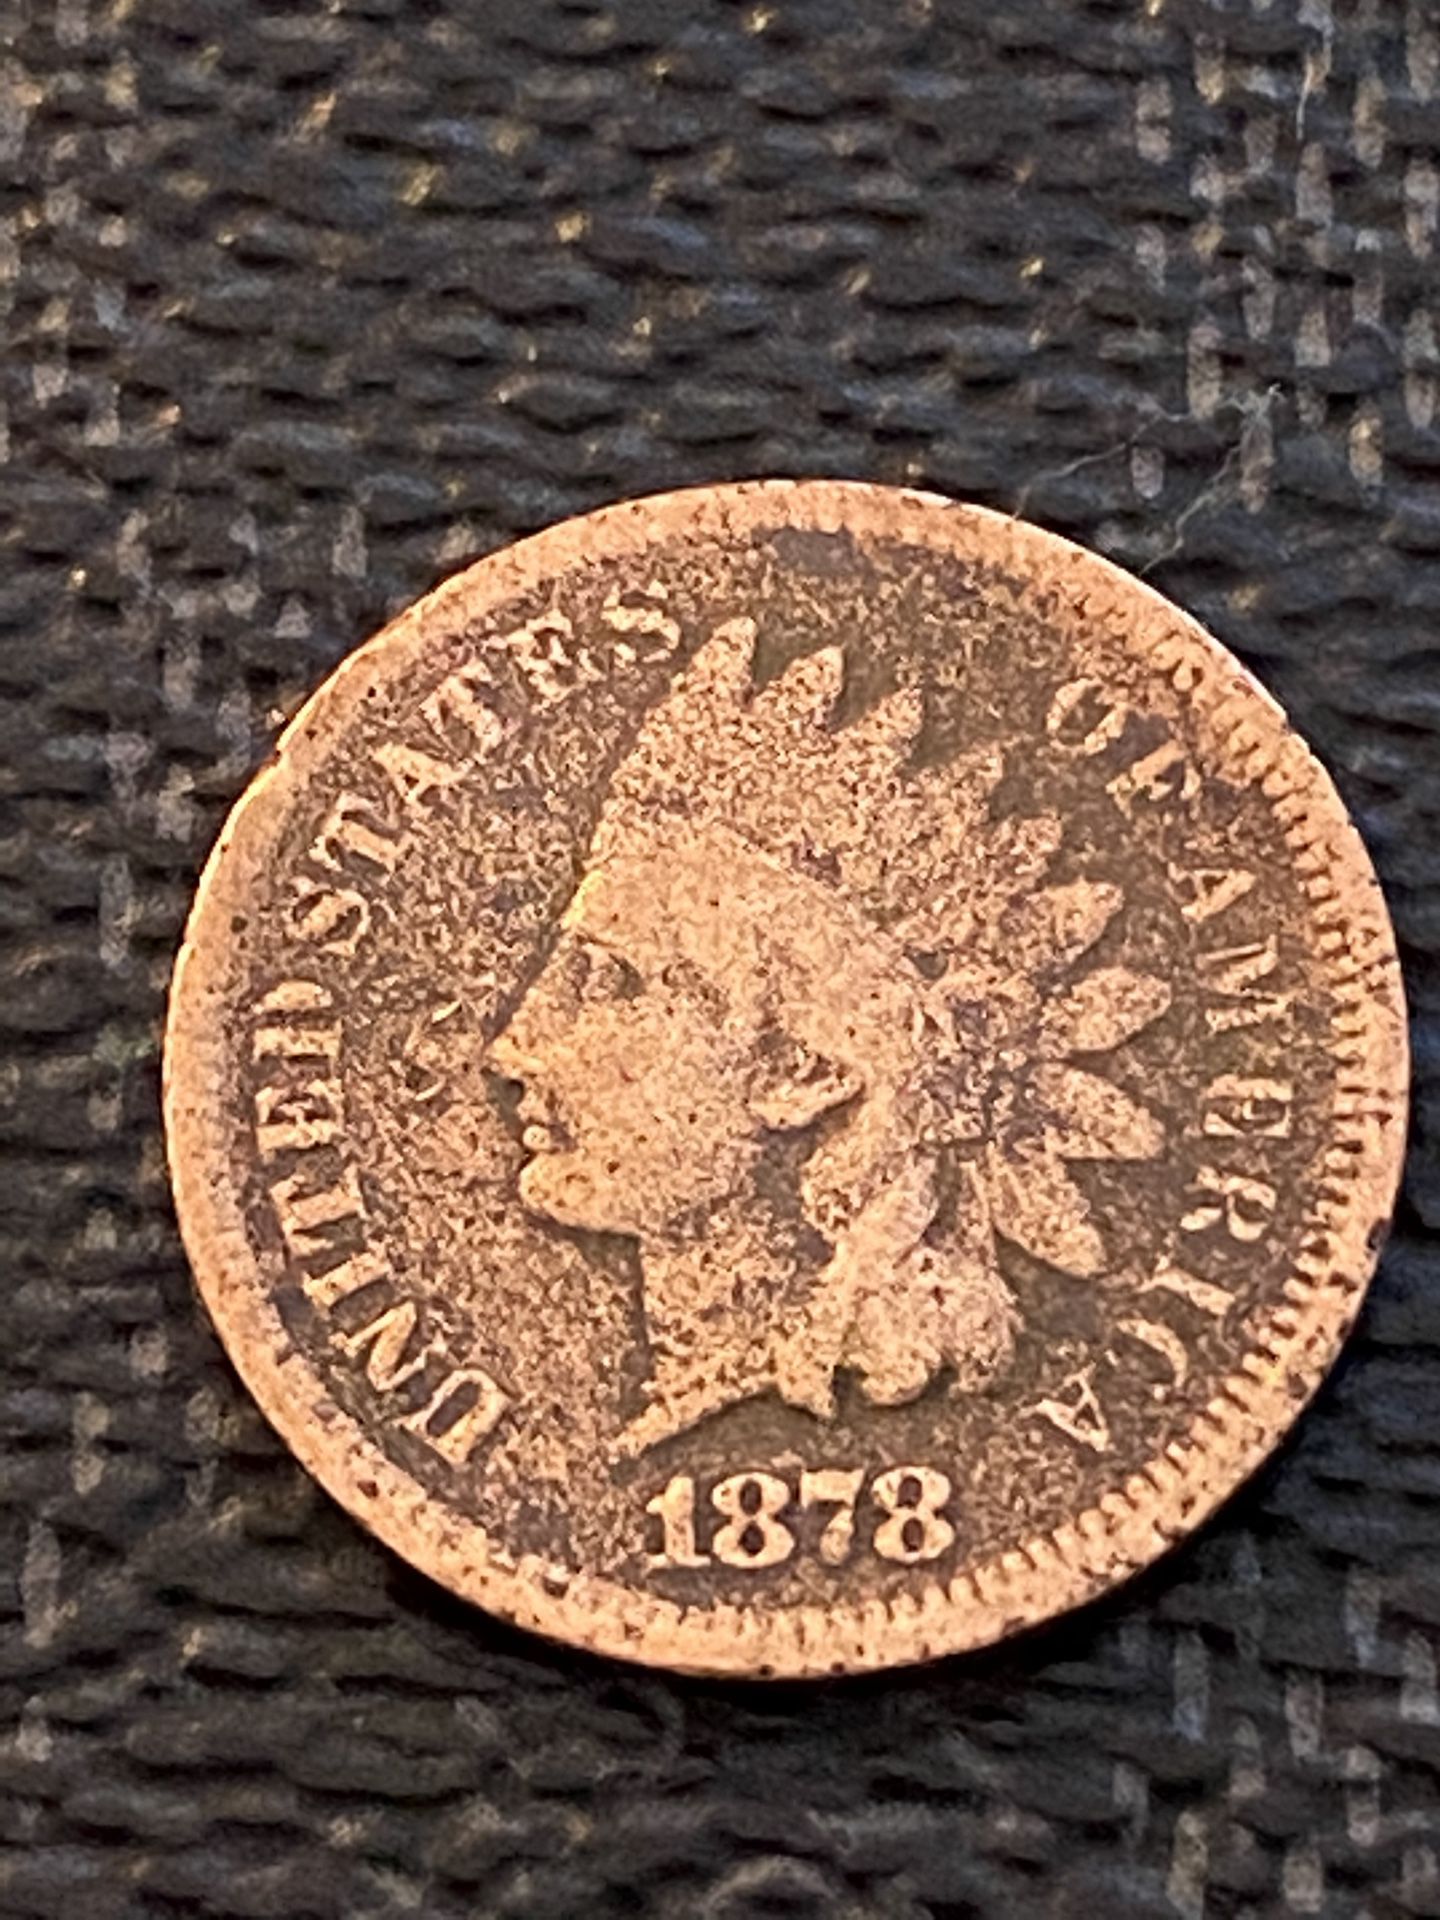 1878 Indian head penny